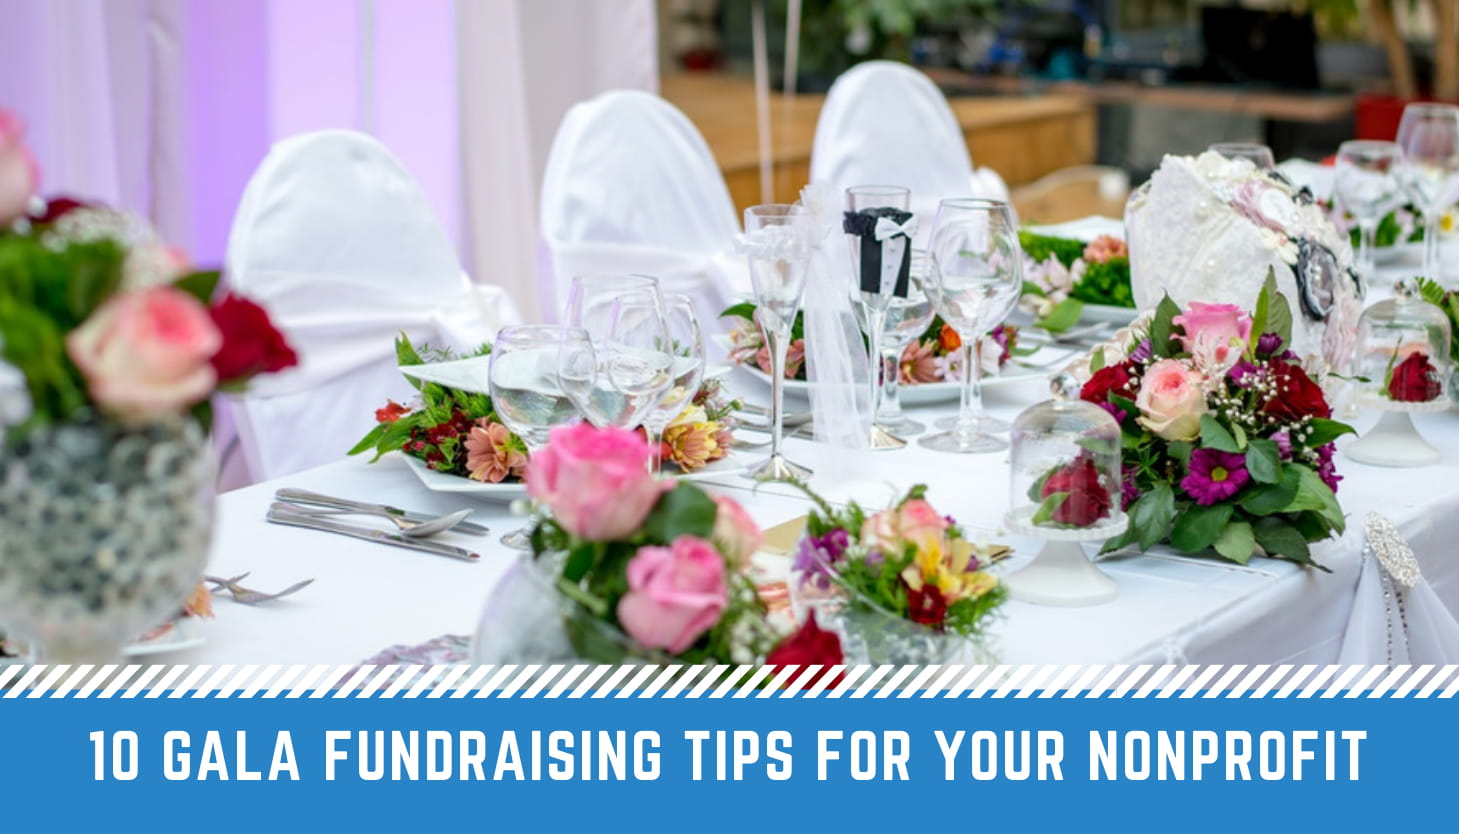 10 Proven Gala Fundraising Tips for Your Nonprofit